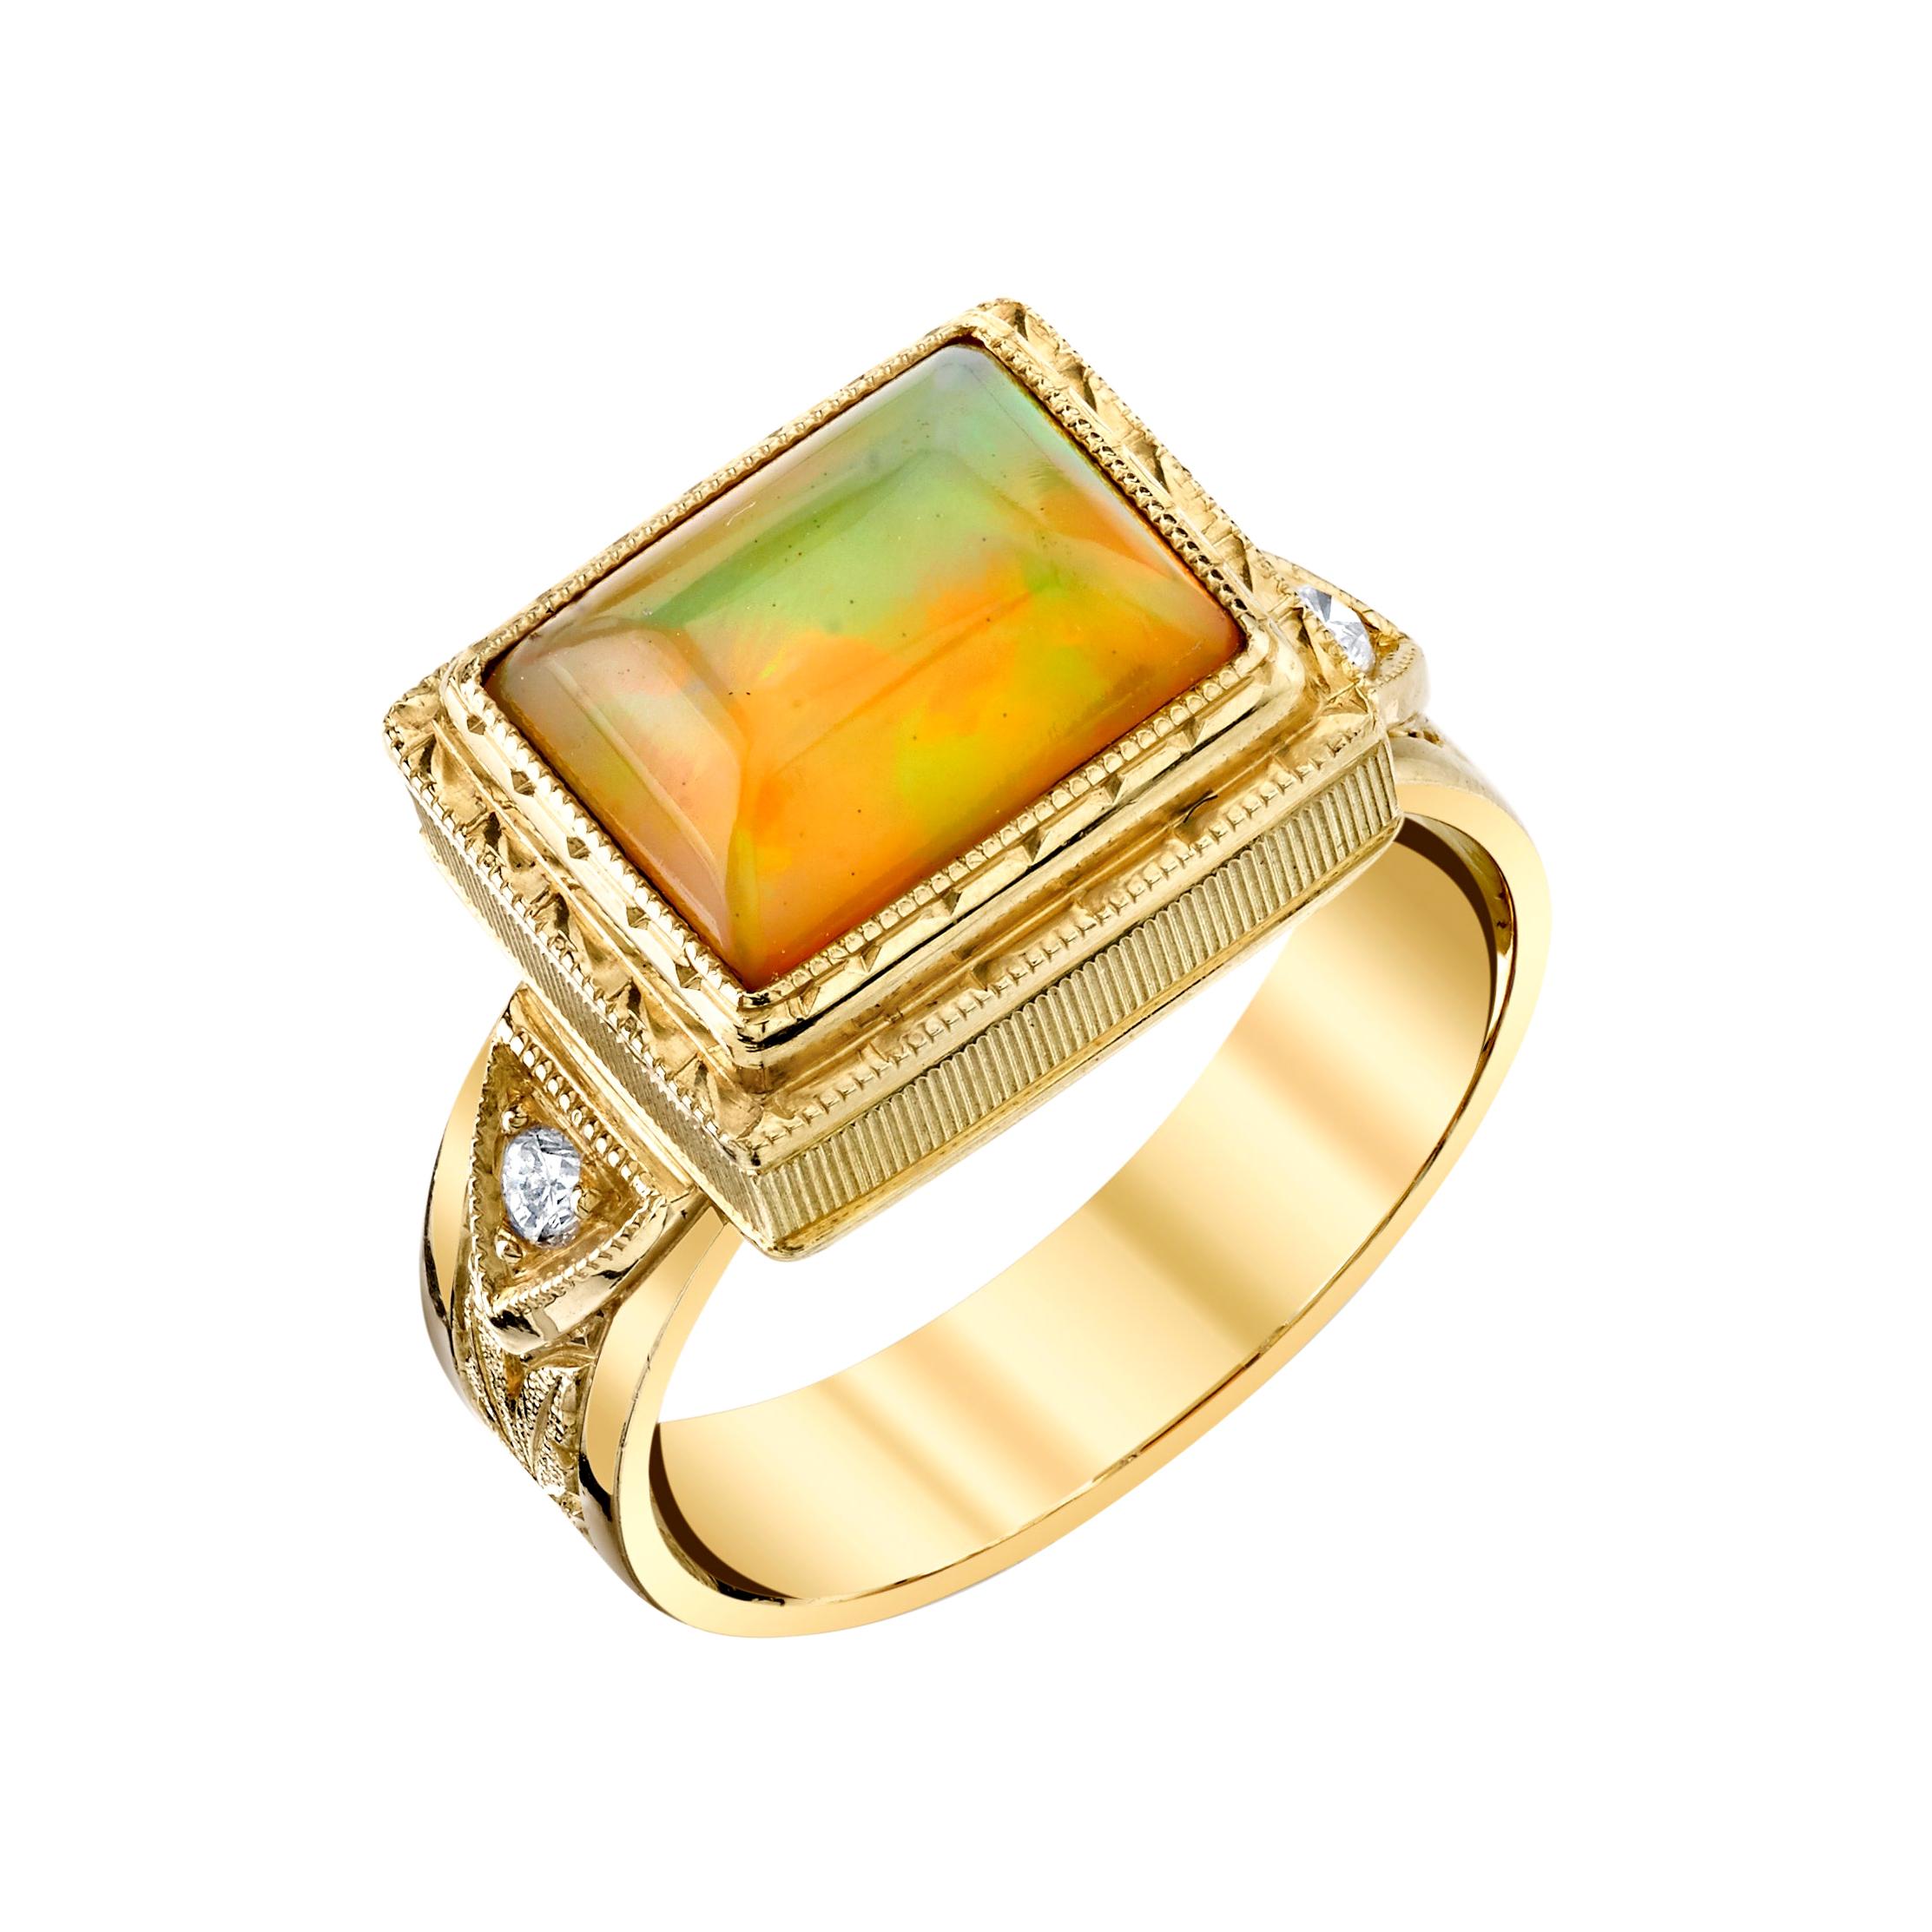  2.14 Carat Opal Cushion and Diamond Hand-Engraved Band Ring in 18k Yellow Gold  For Sale